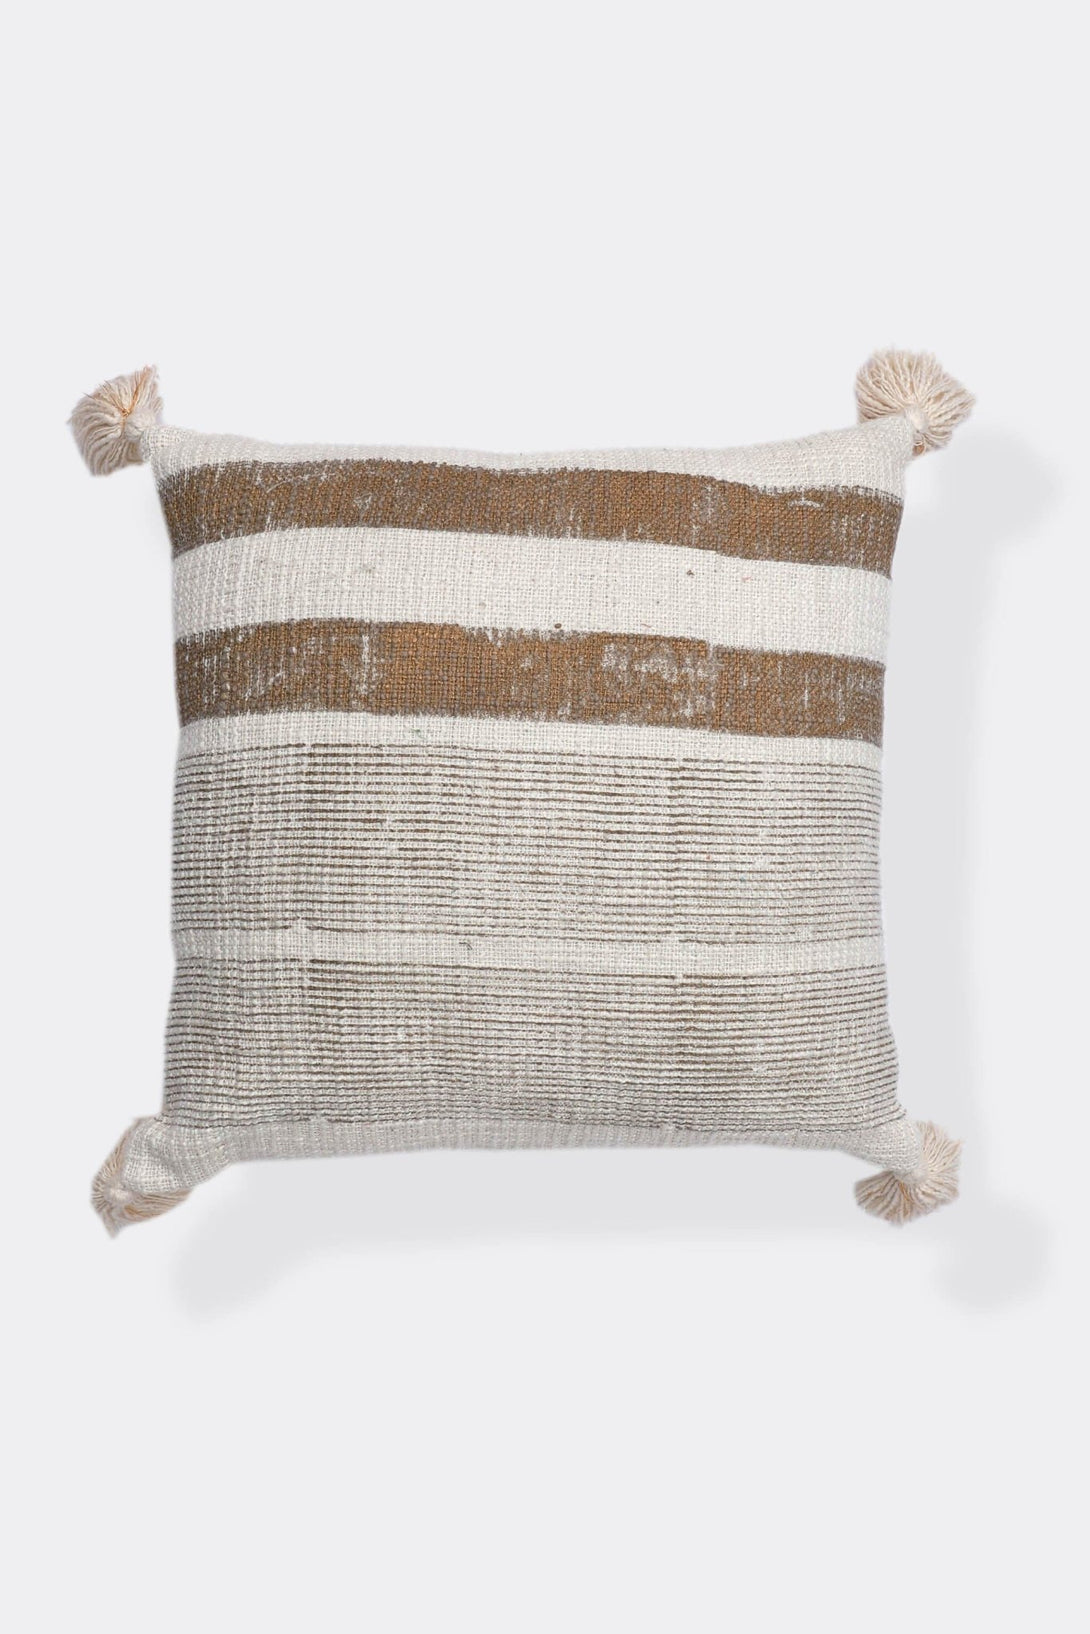 NEWRY - SQUARE CUSHION COVER - BROWN - ART AVENUE